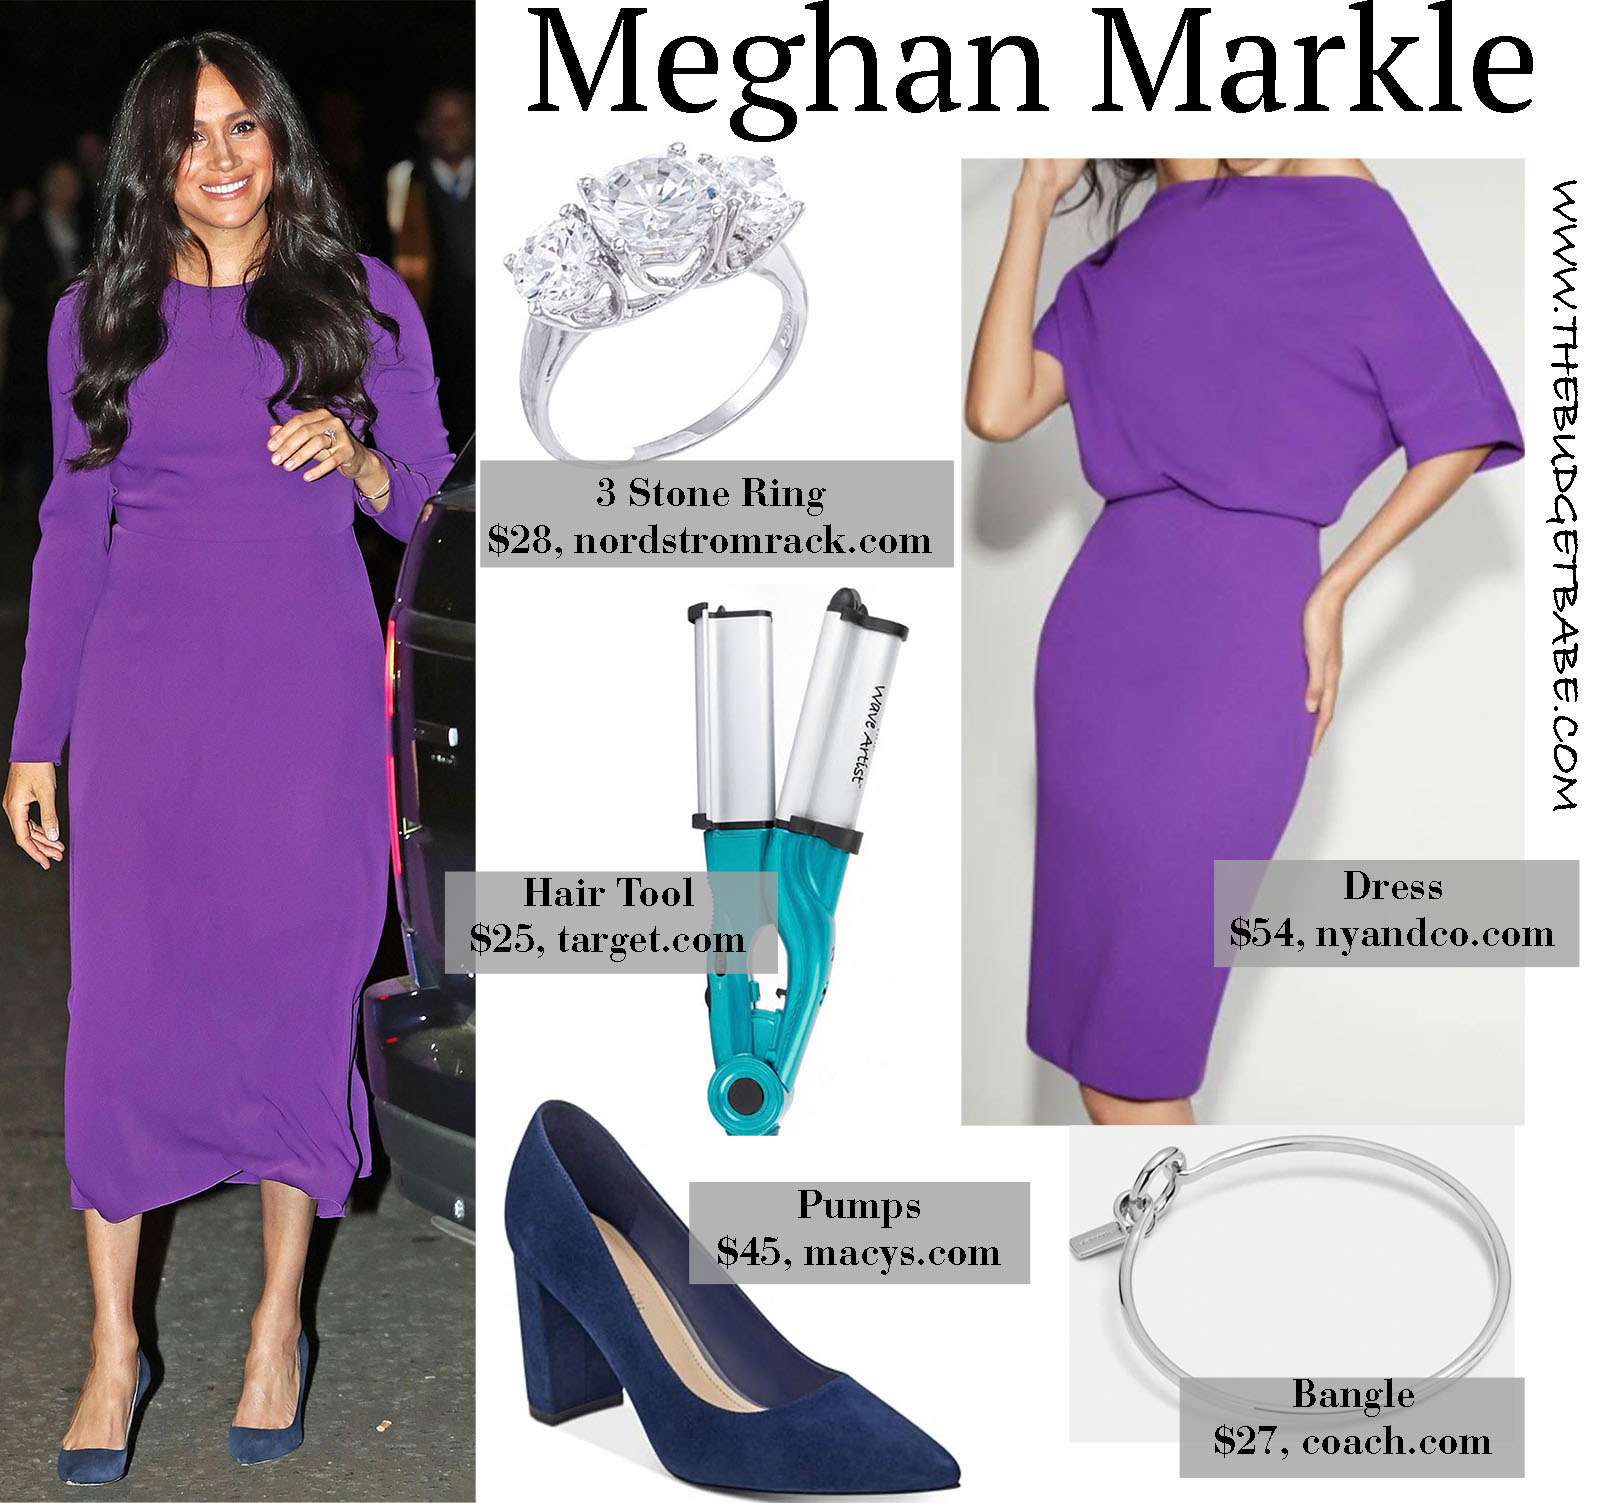 Meghan Markle steps out in a bright purple dress that we love!